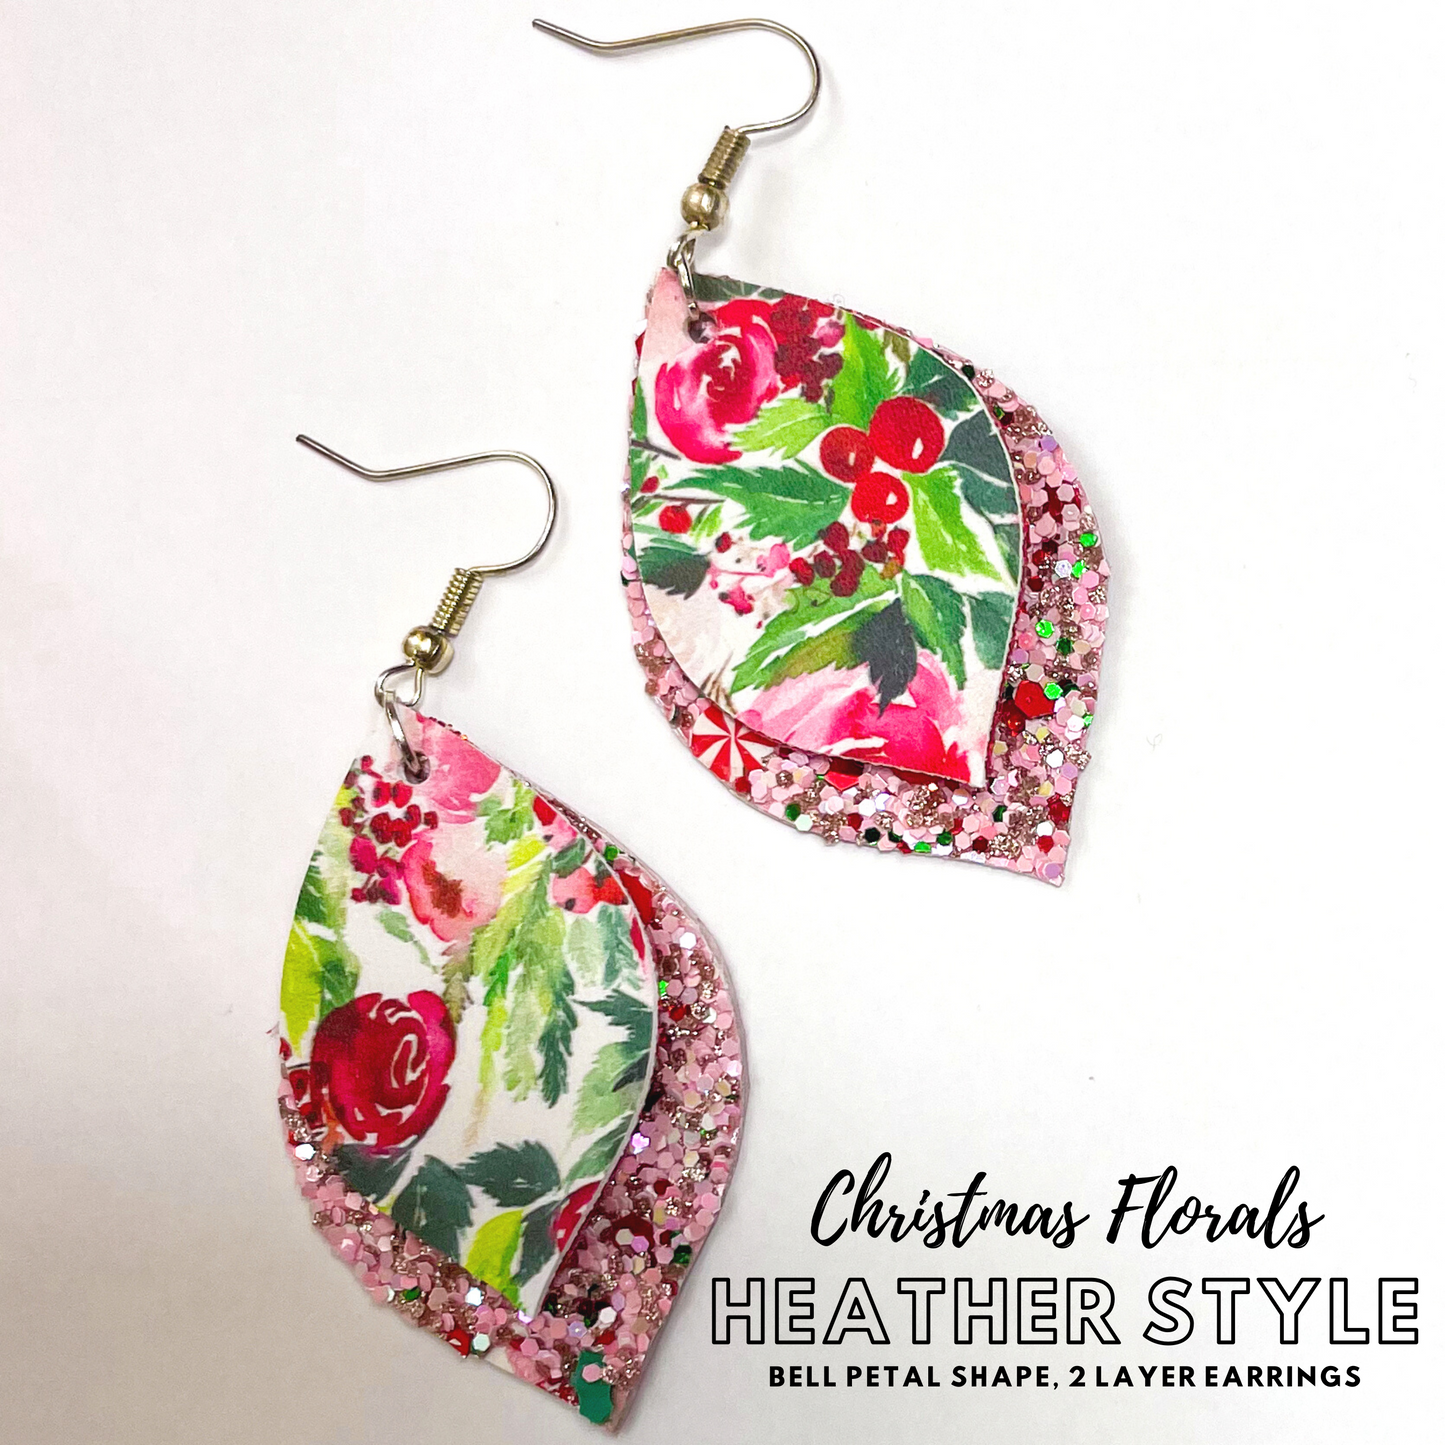 Christmas Florals Collection Earrings | Heather Style Dangle Earrings | Layered Bell Petal Shape